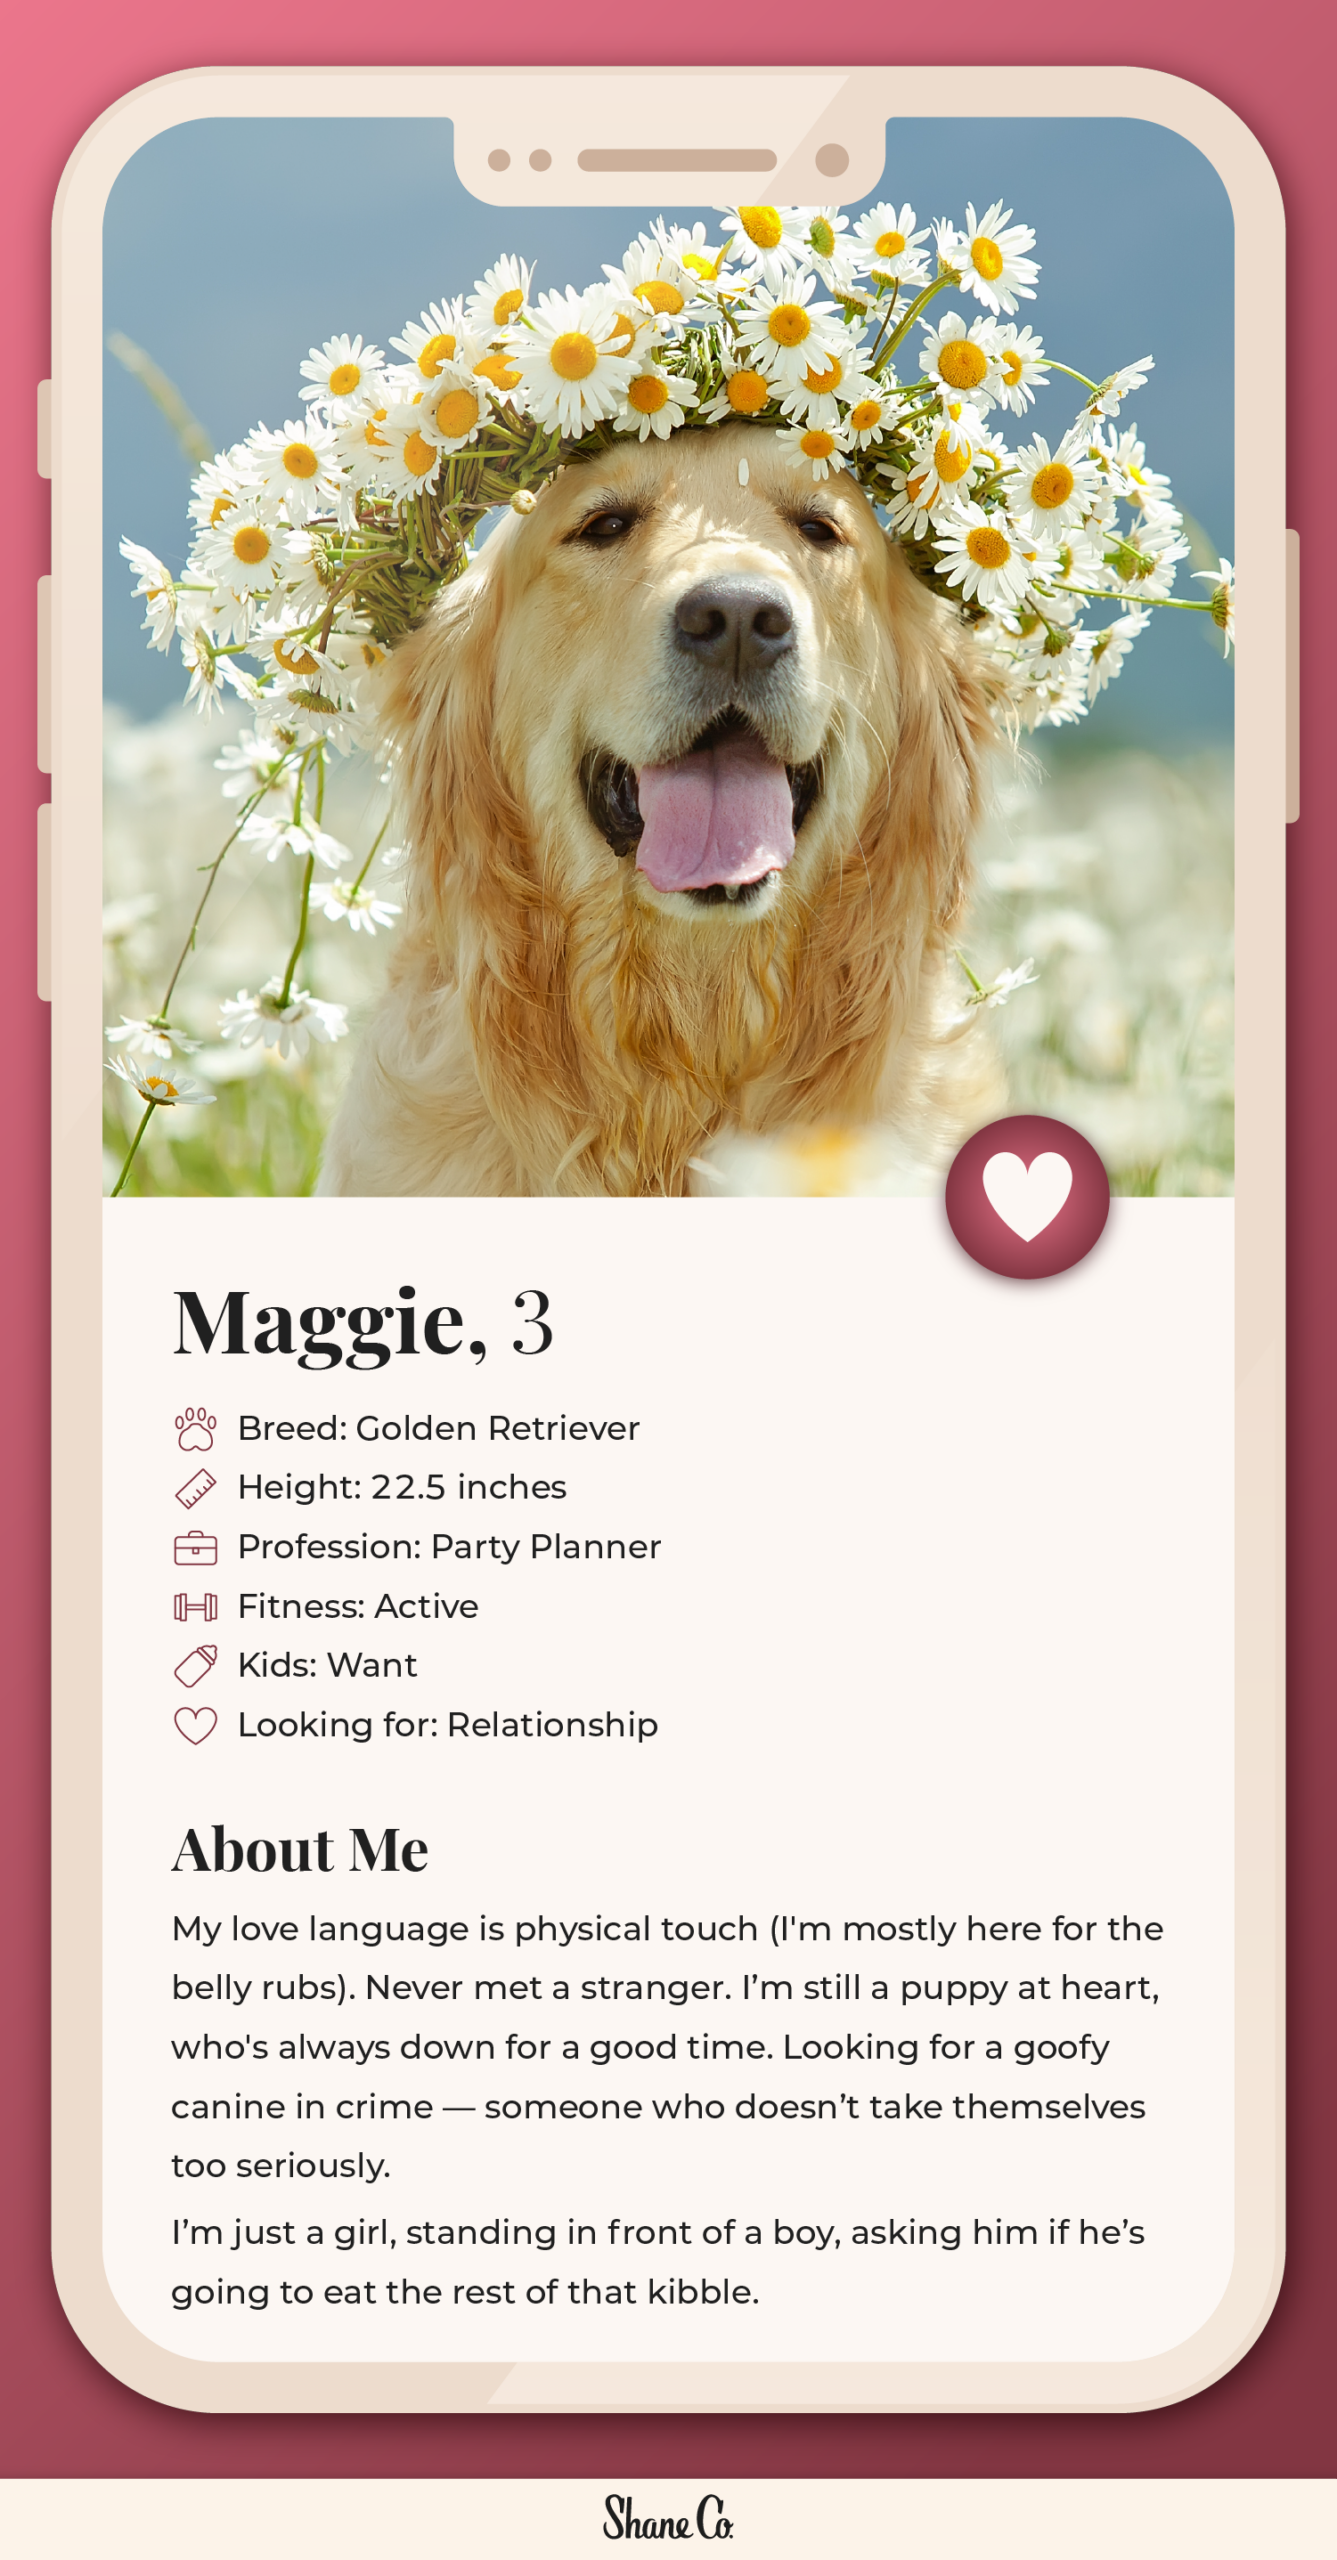 Graphic showing a fictional dating profile for a Golden Retriever